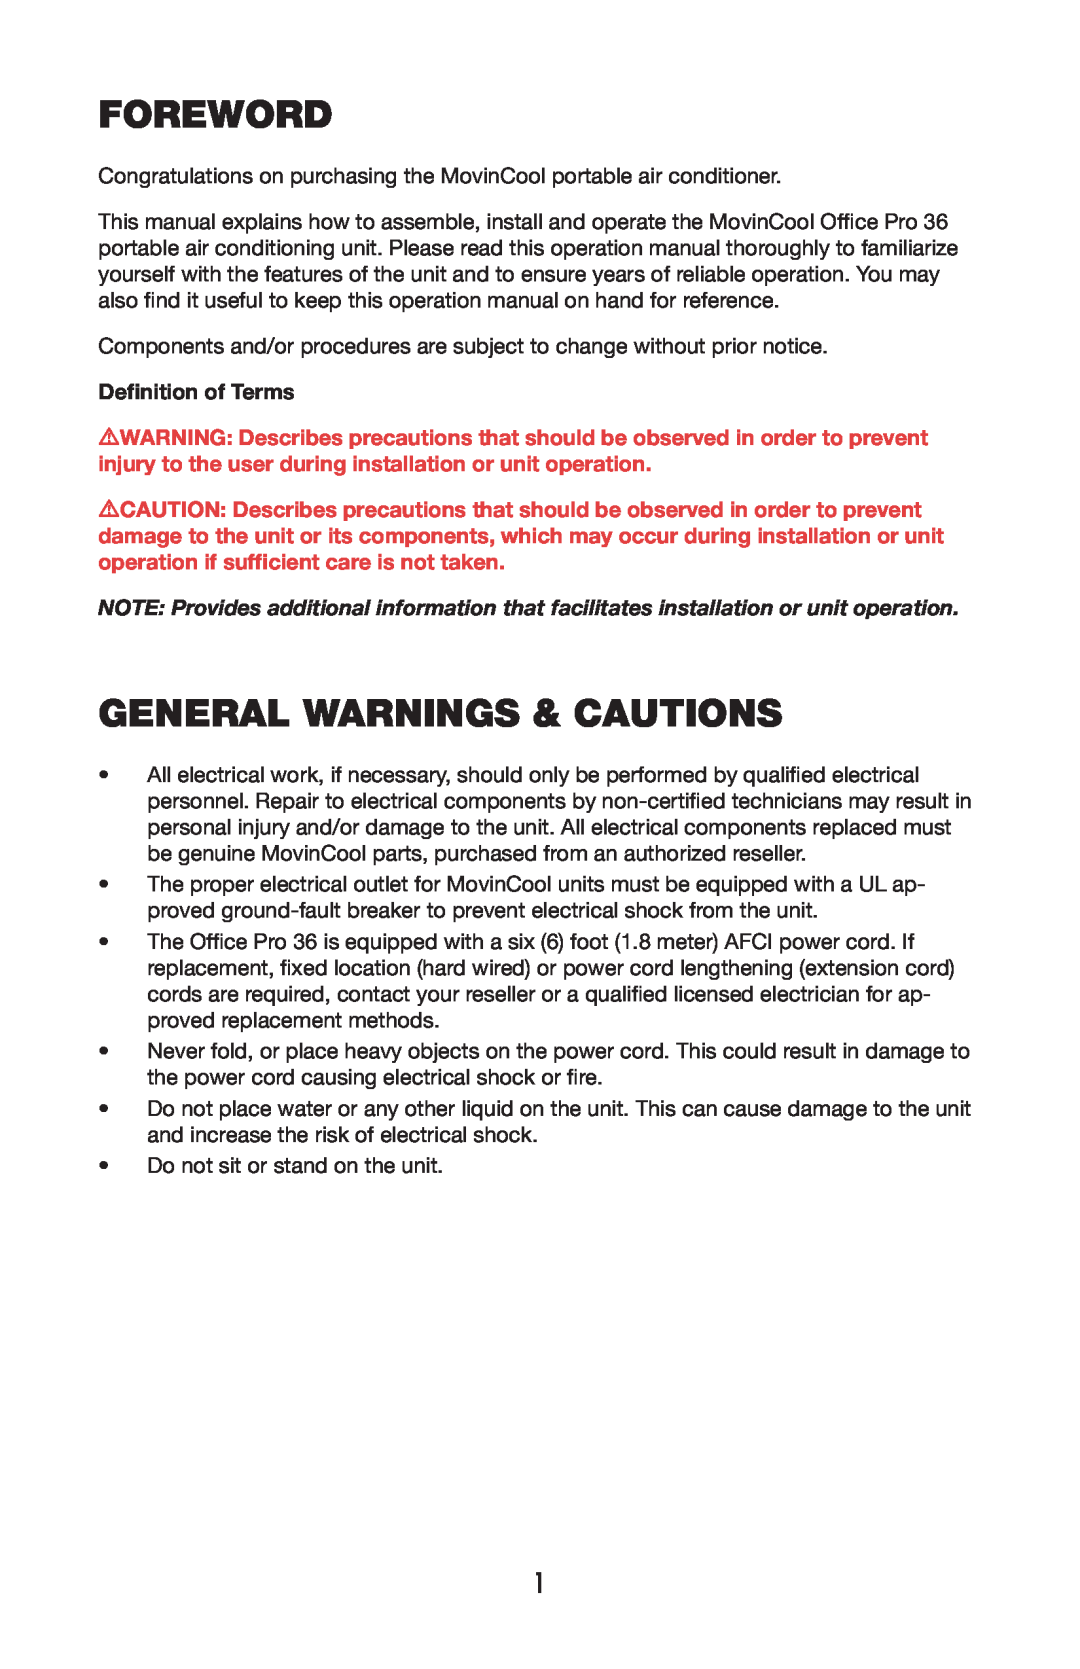 Denso 36 operation manual Foreword, General Warnings & Cautions, Deﬁnition of Terms 